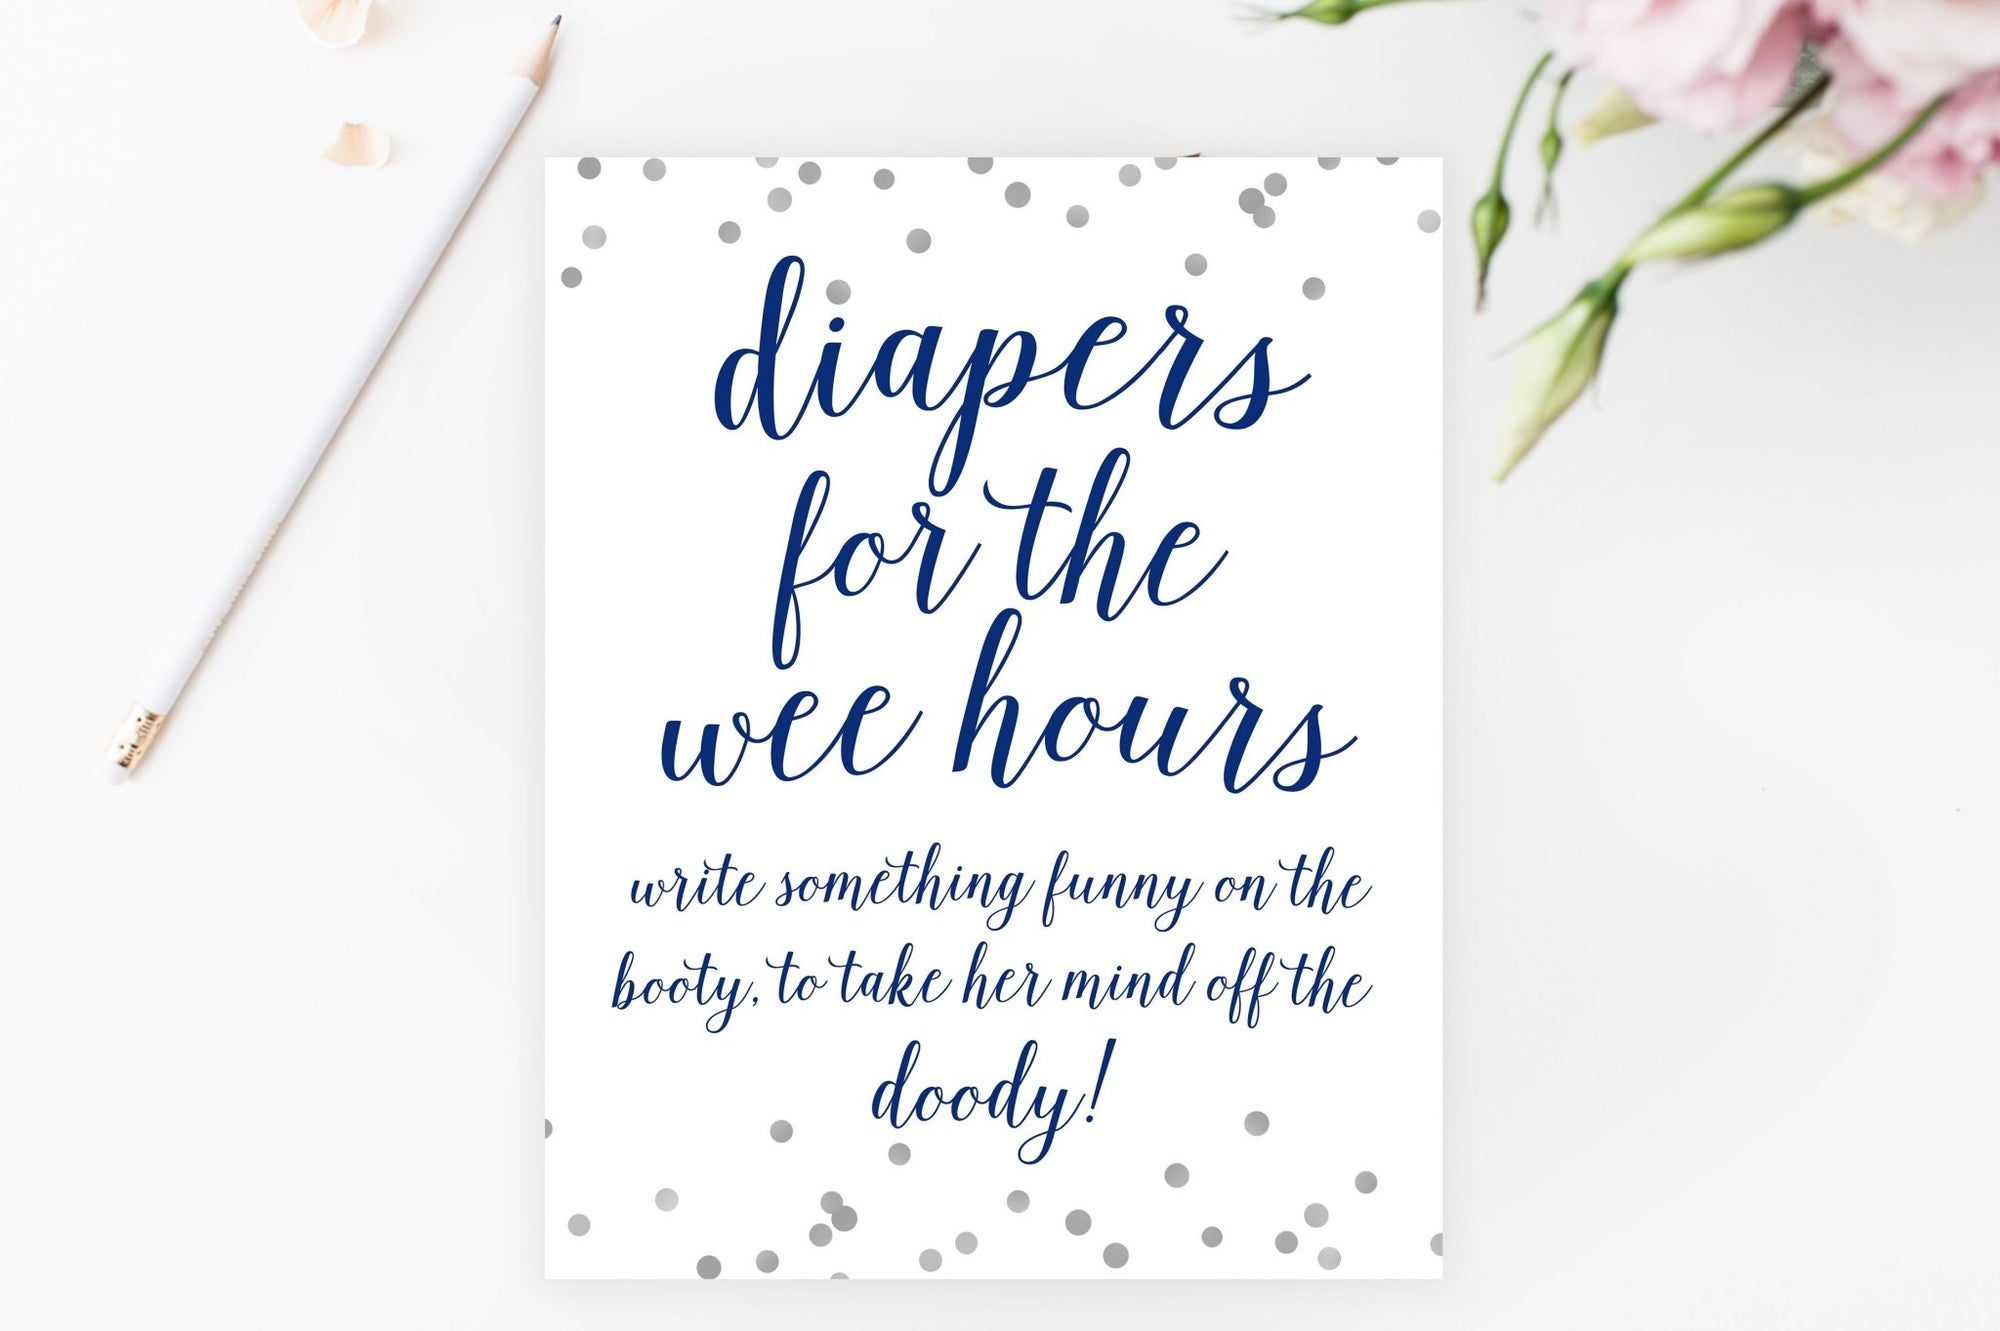 Diapers for the Wee Hours Sign - Navy & Grey Confetti Printable - Pretty Collected